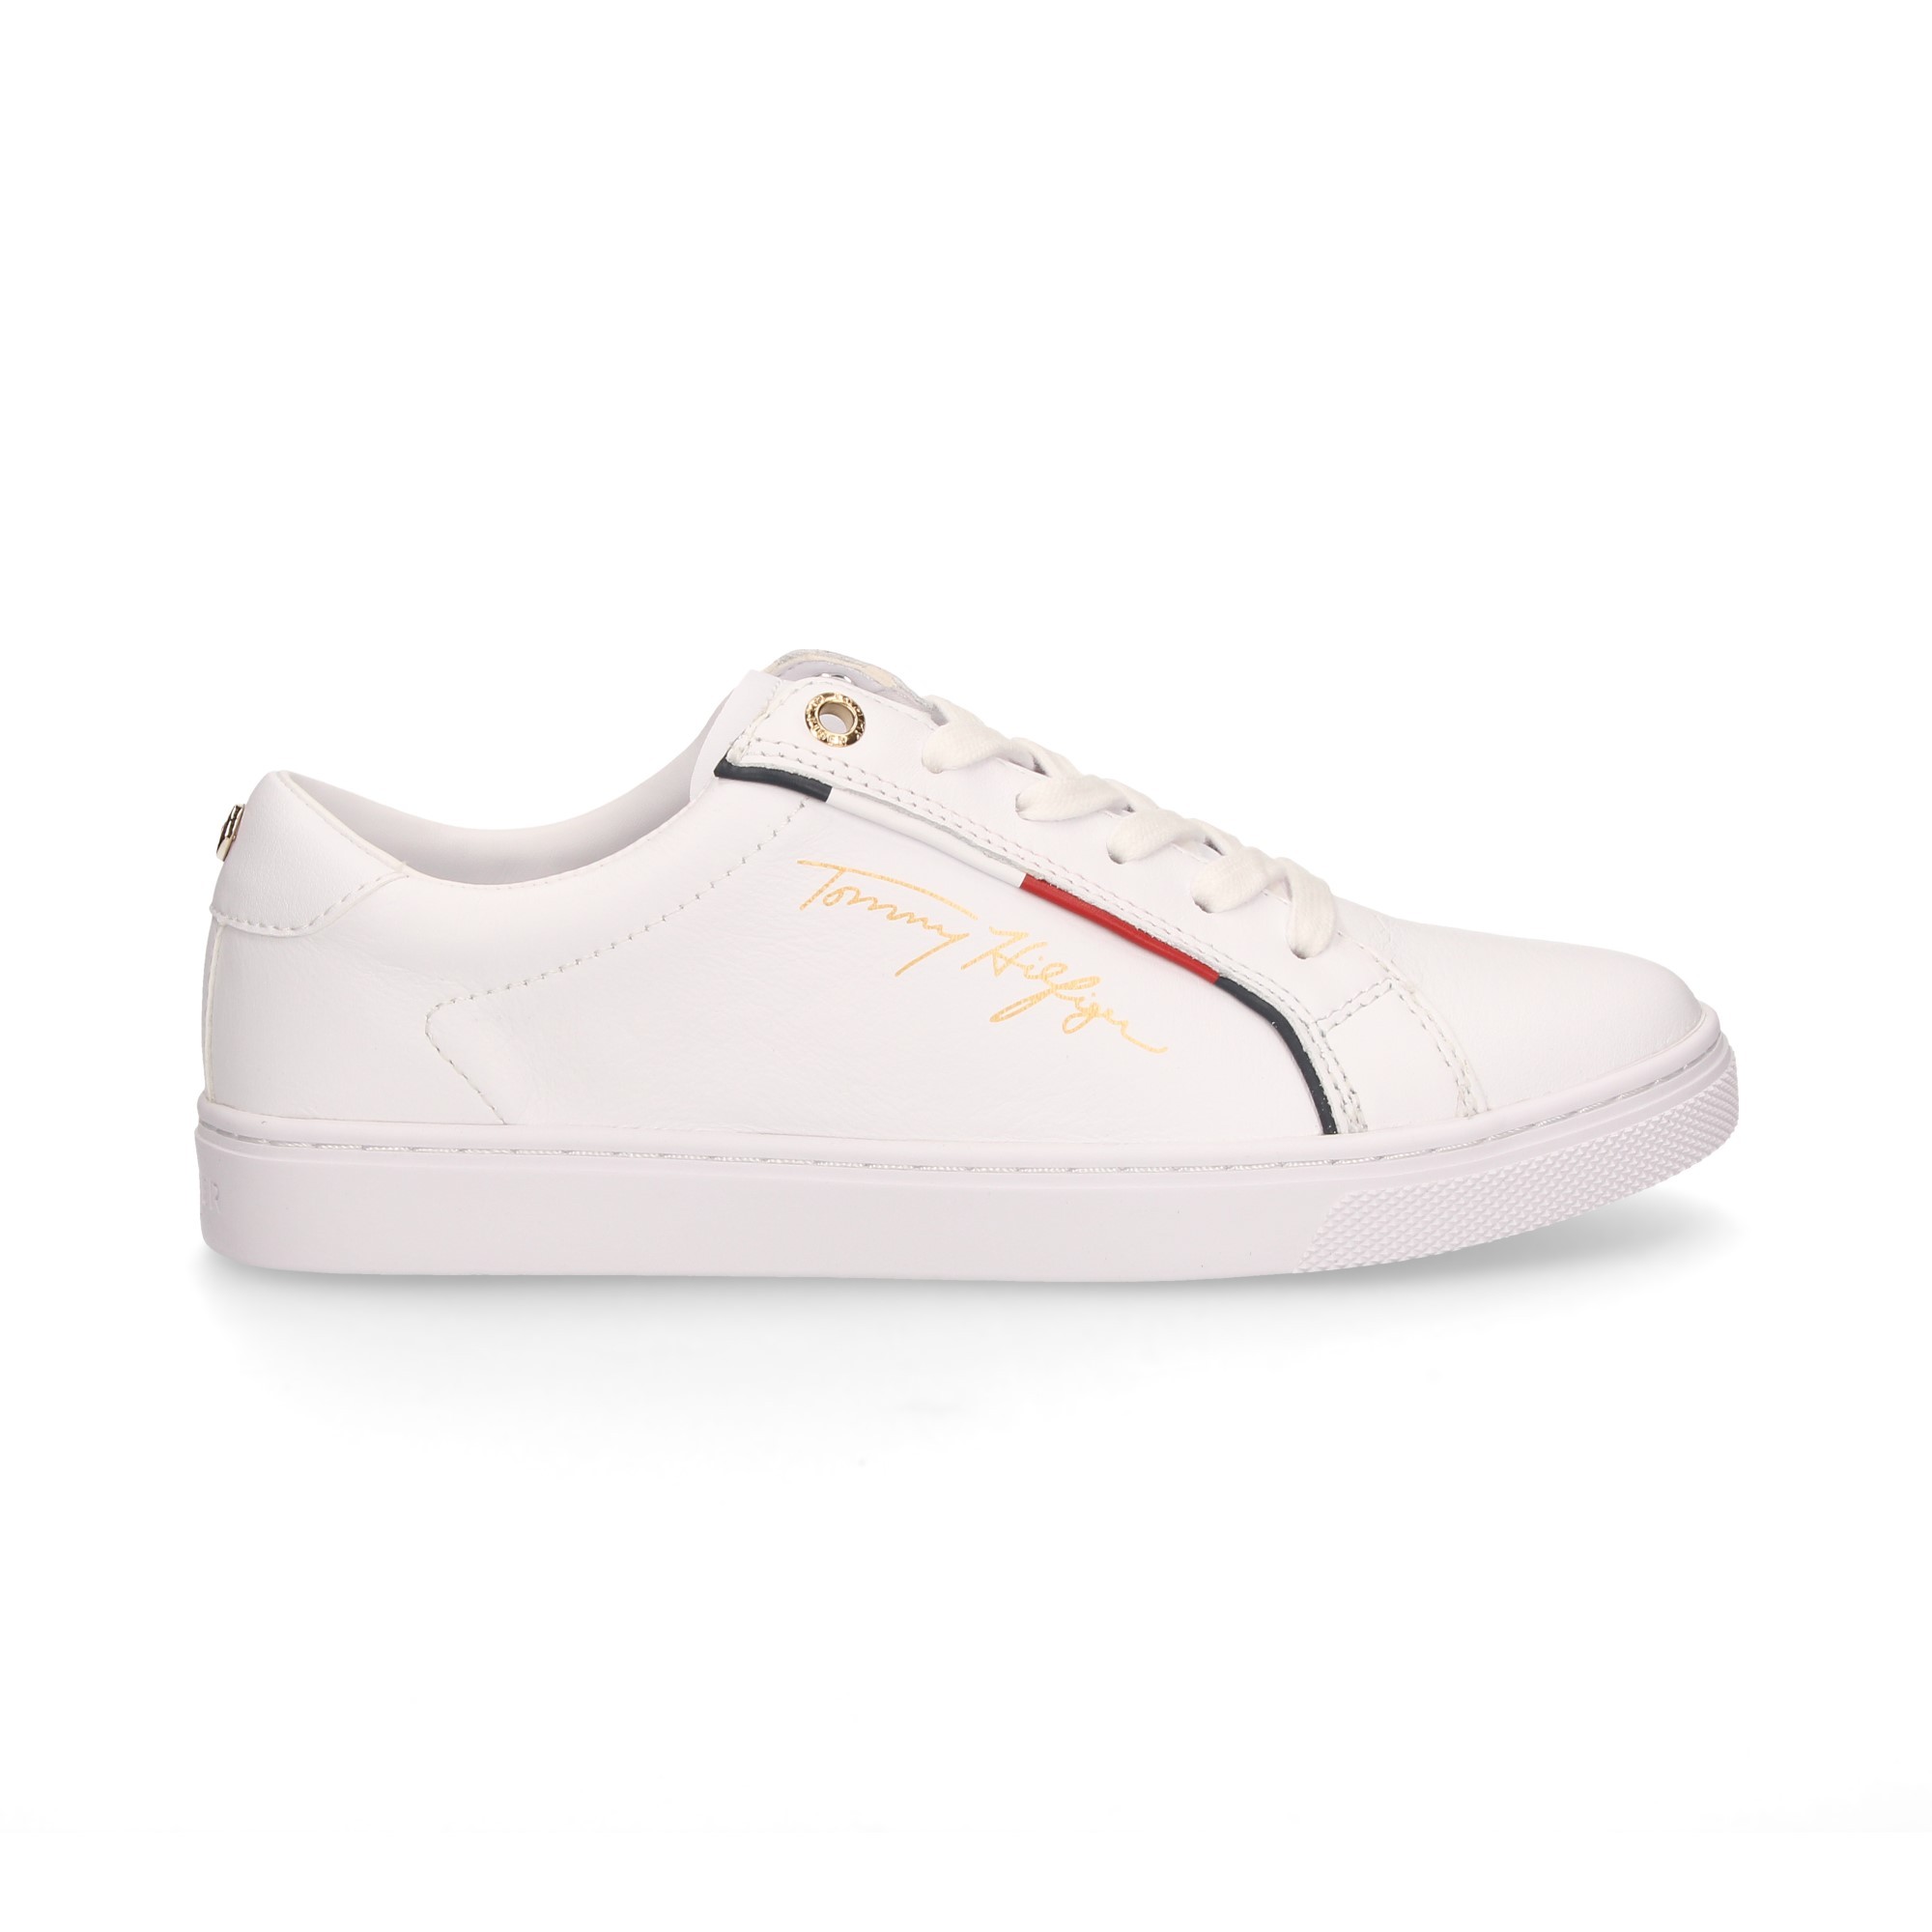 sporty-signature-white-leather-side